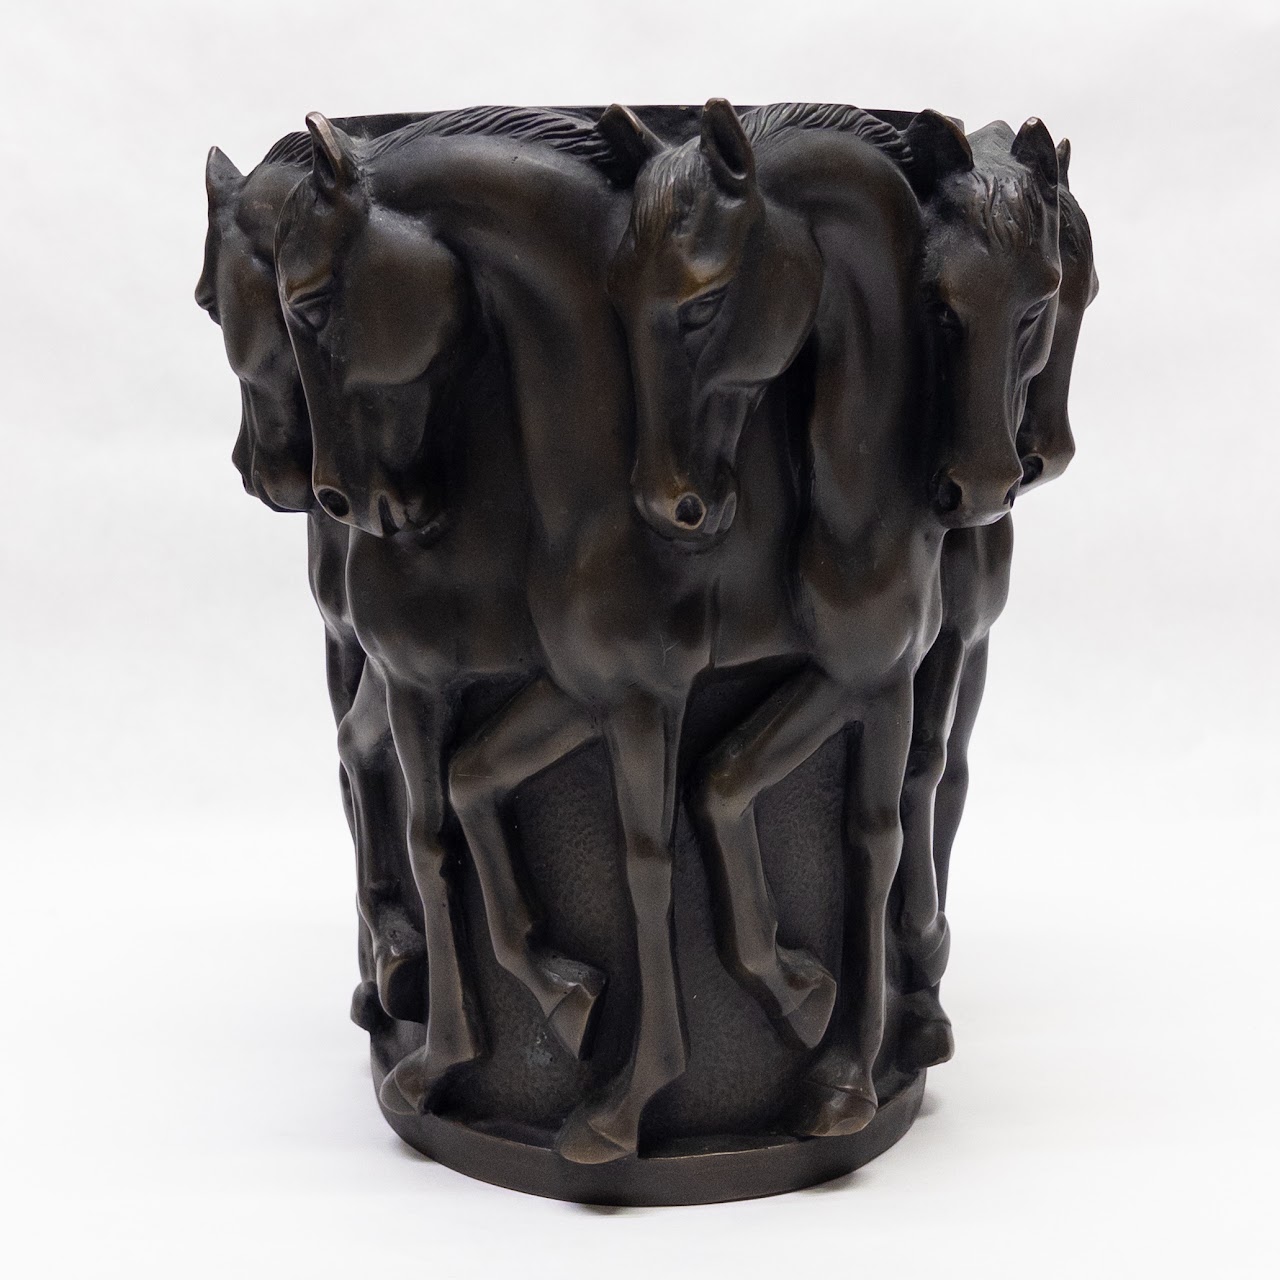 1920's Equestrian Patinated High Relief Bronze Vase